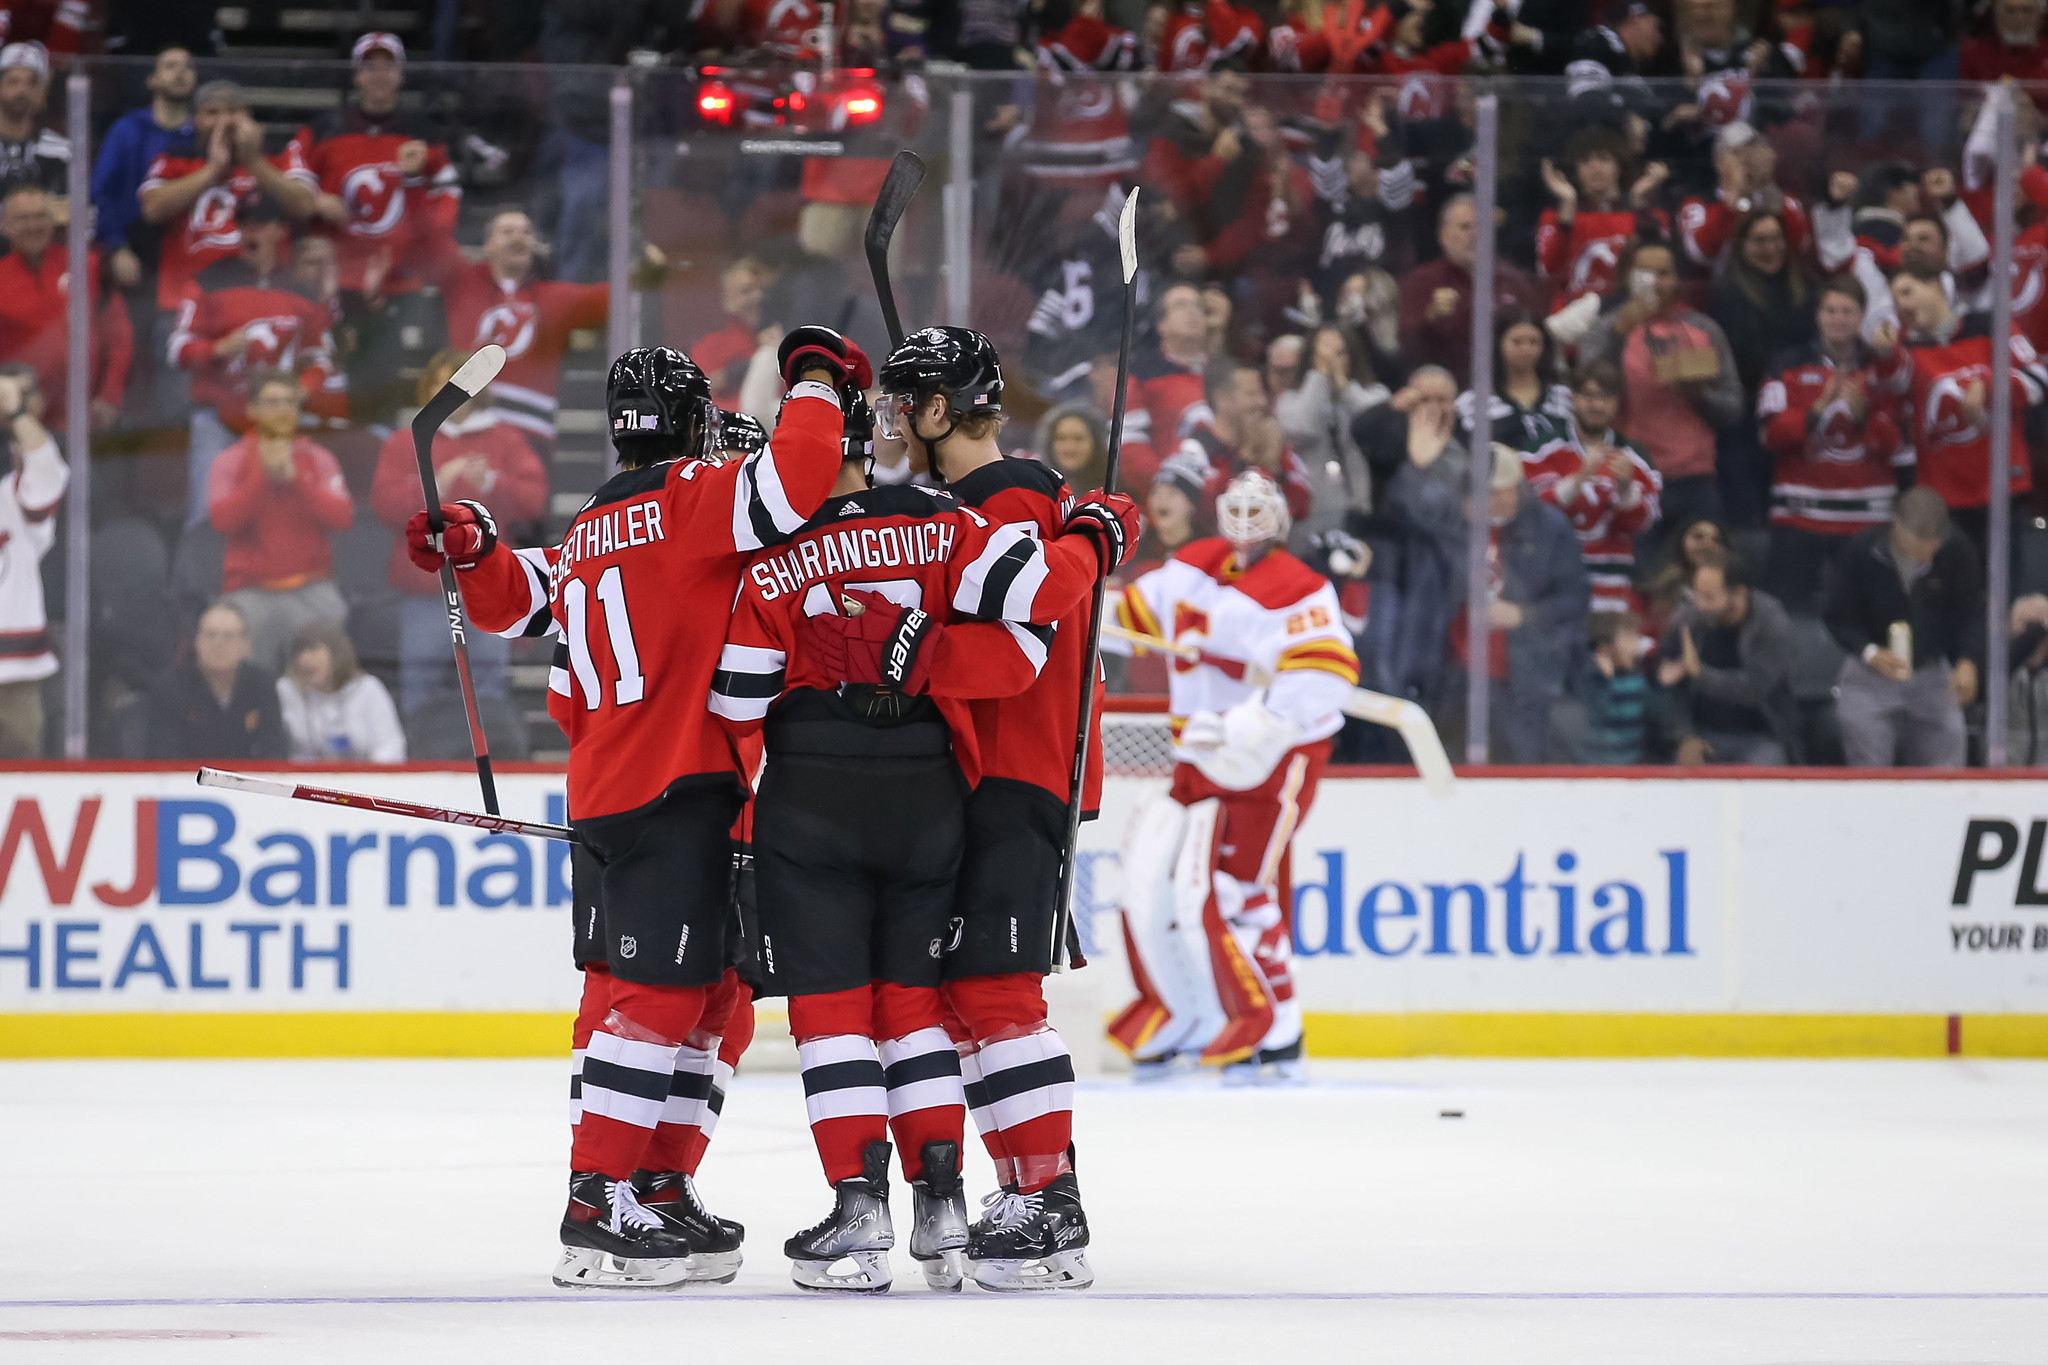 New Jersey Devils Must Fix Slow Starts to Have Playoff Success